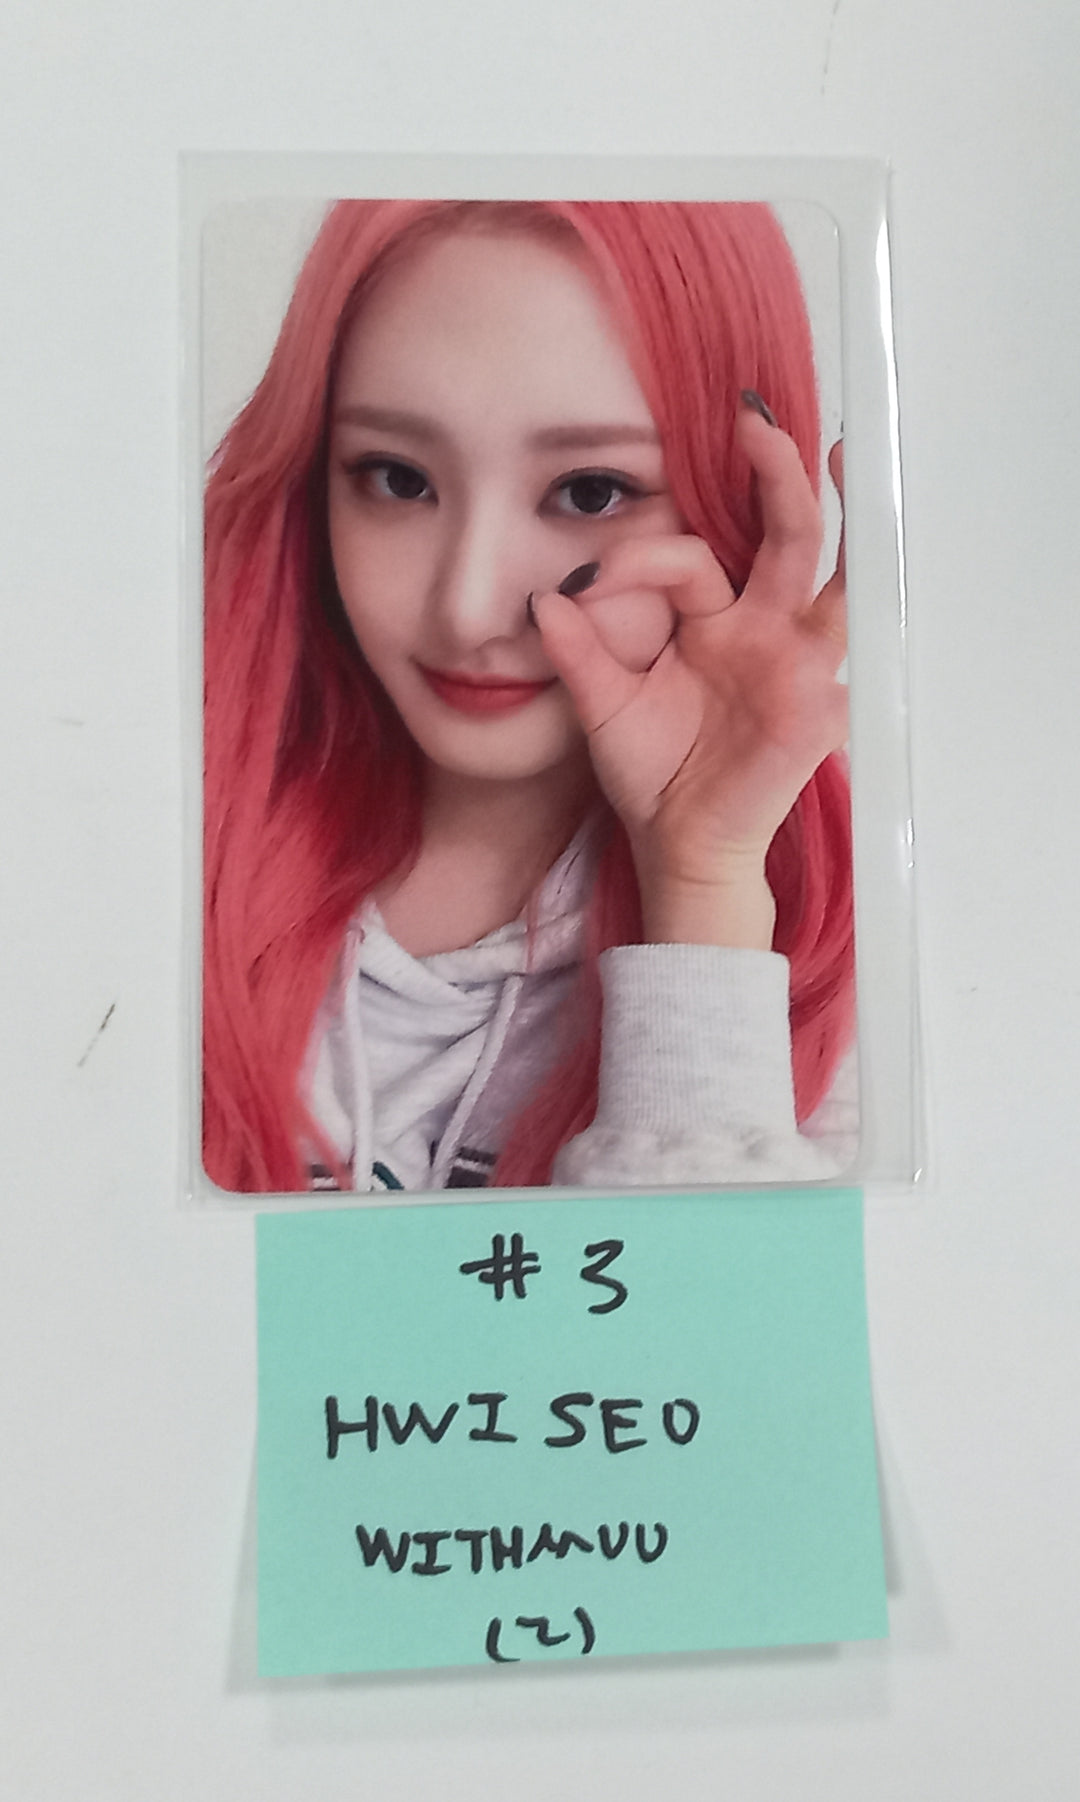 H1-KEY "Seoul Dreaming" - Withmuu Fansign Event Photocard Round 2 [23.10.27]